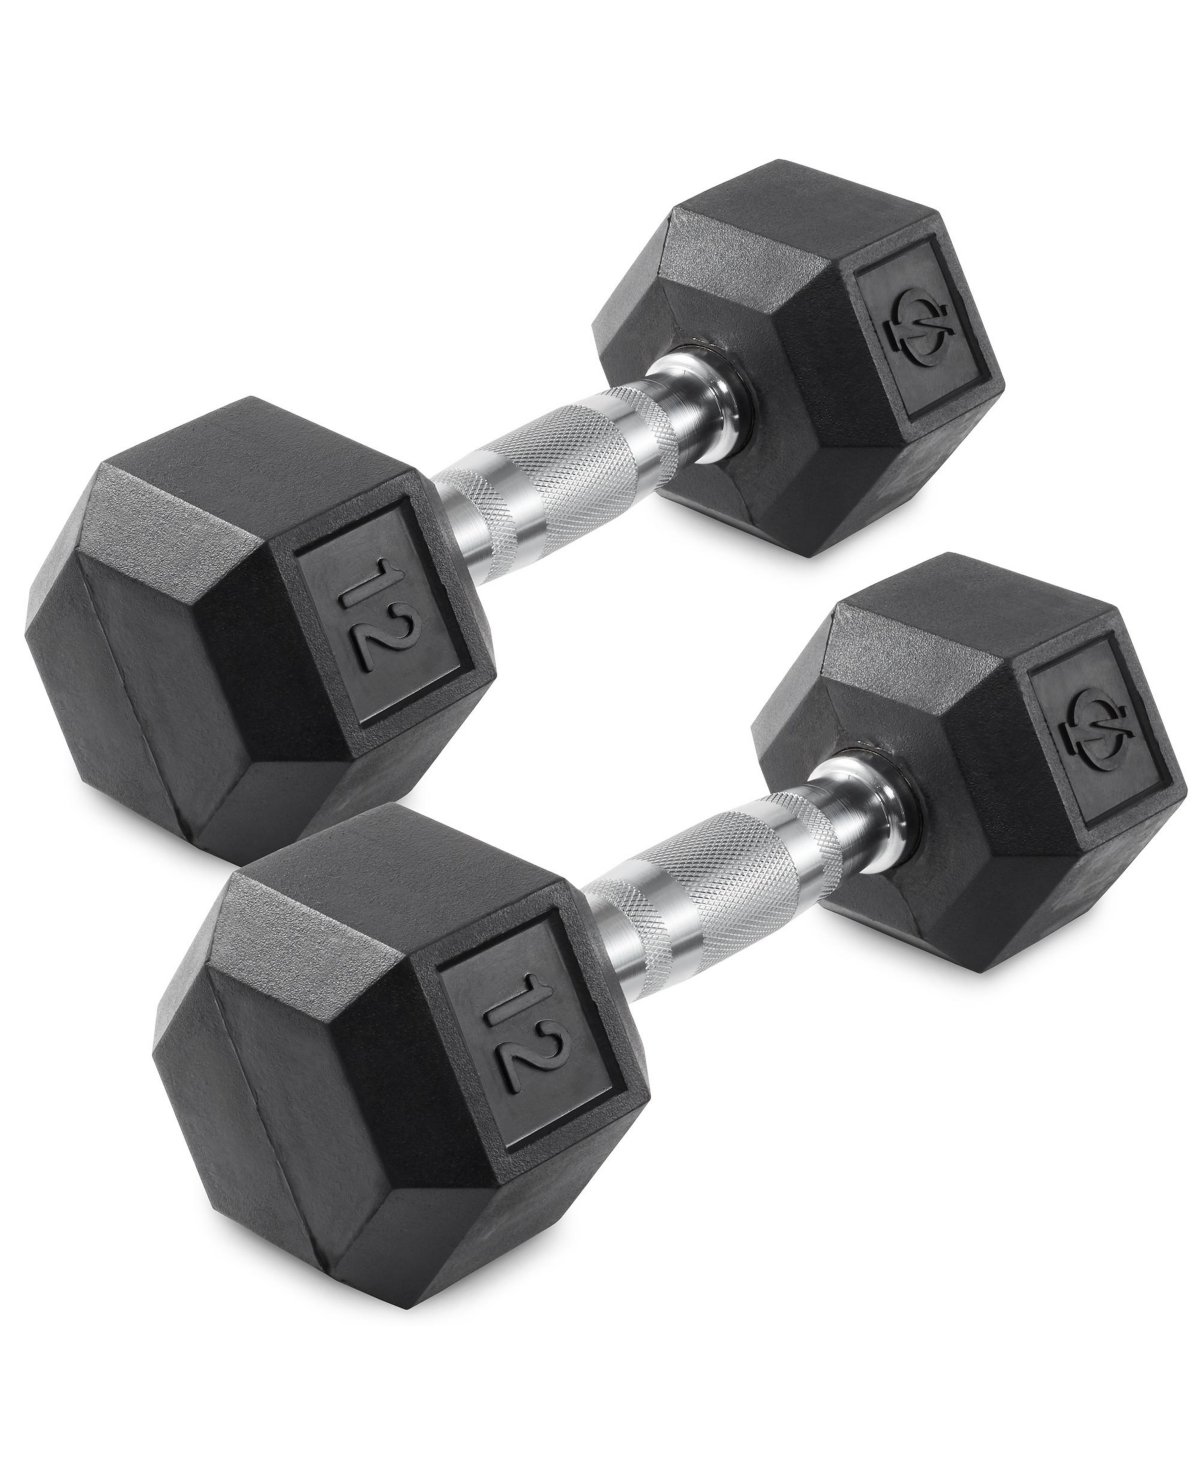 Rubber Coated Hex Dumbbell Hand Weights, 12 lb Pair - Black